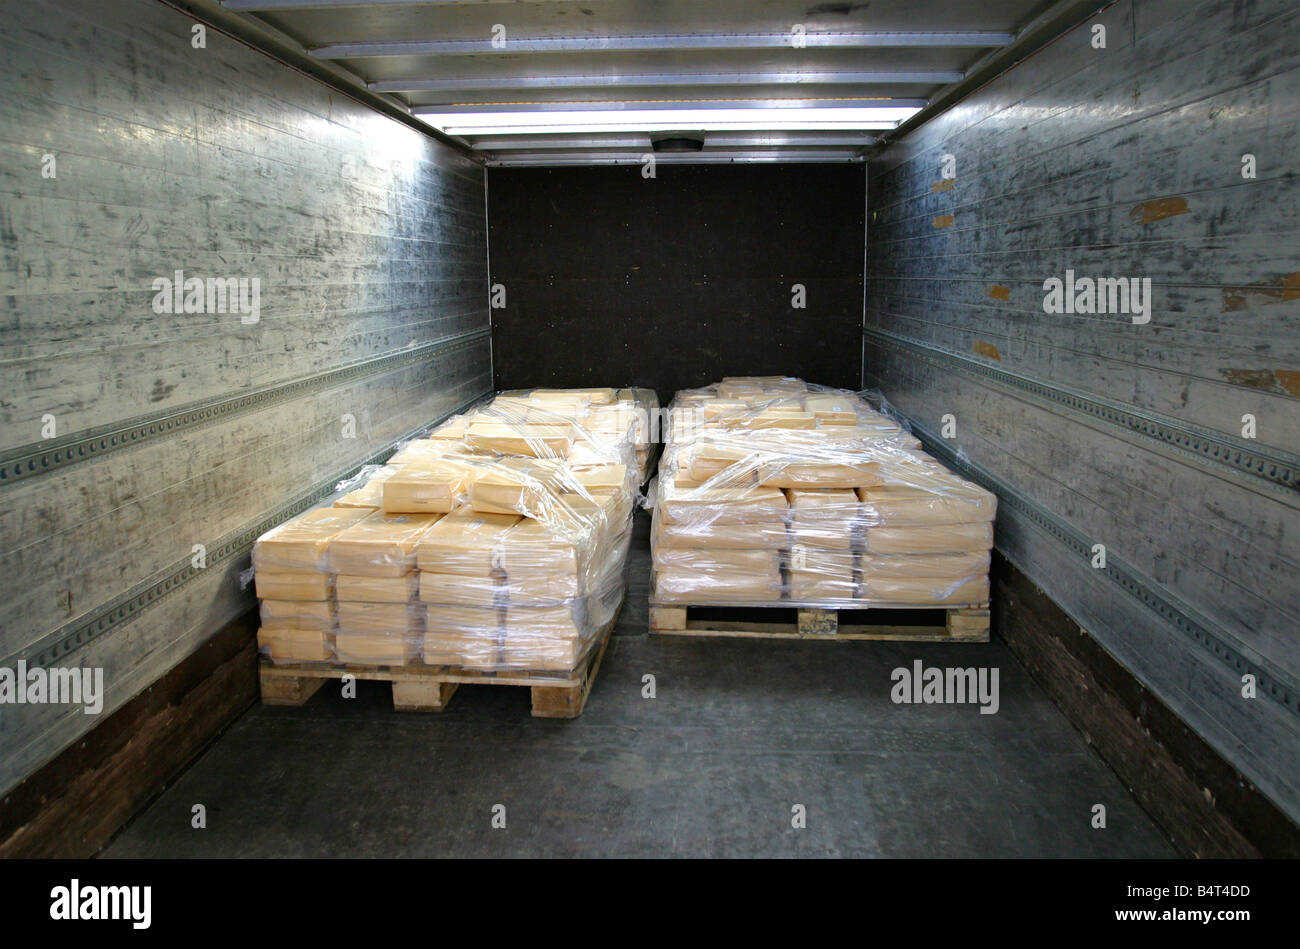 manufactured cheese on pallets in back of refrigerated truck Stock Photo